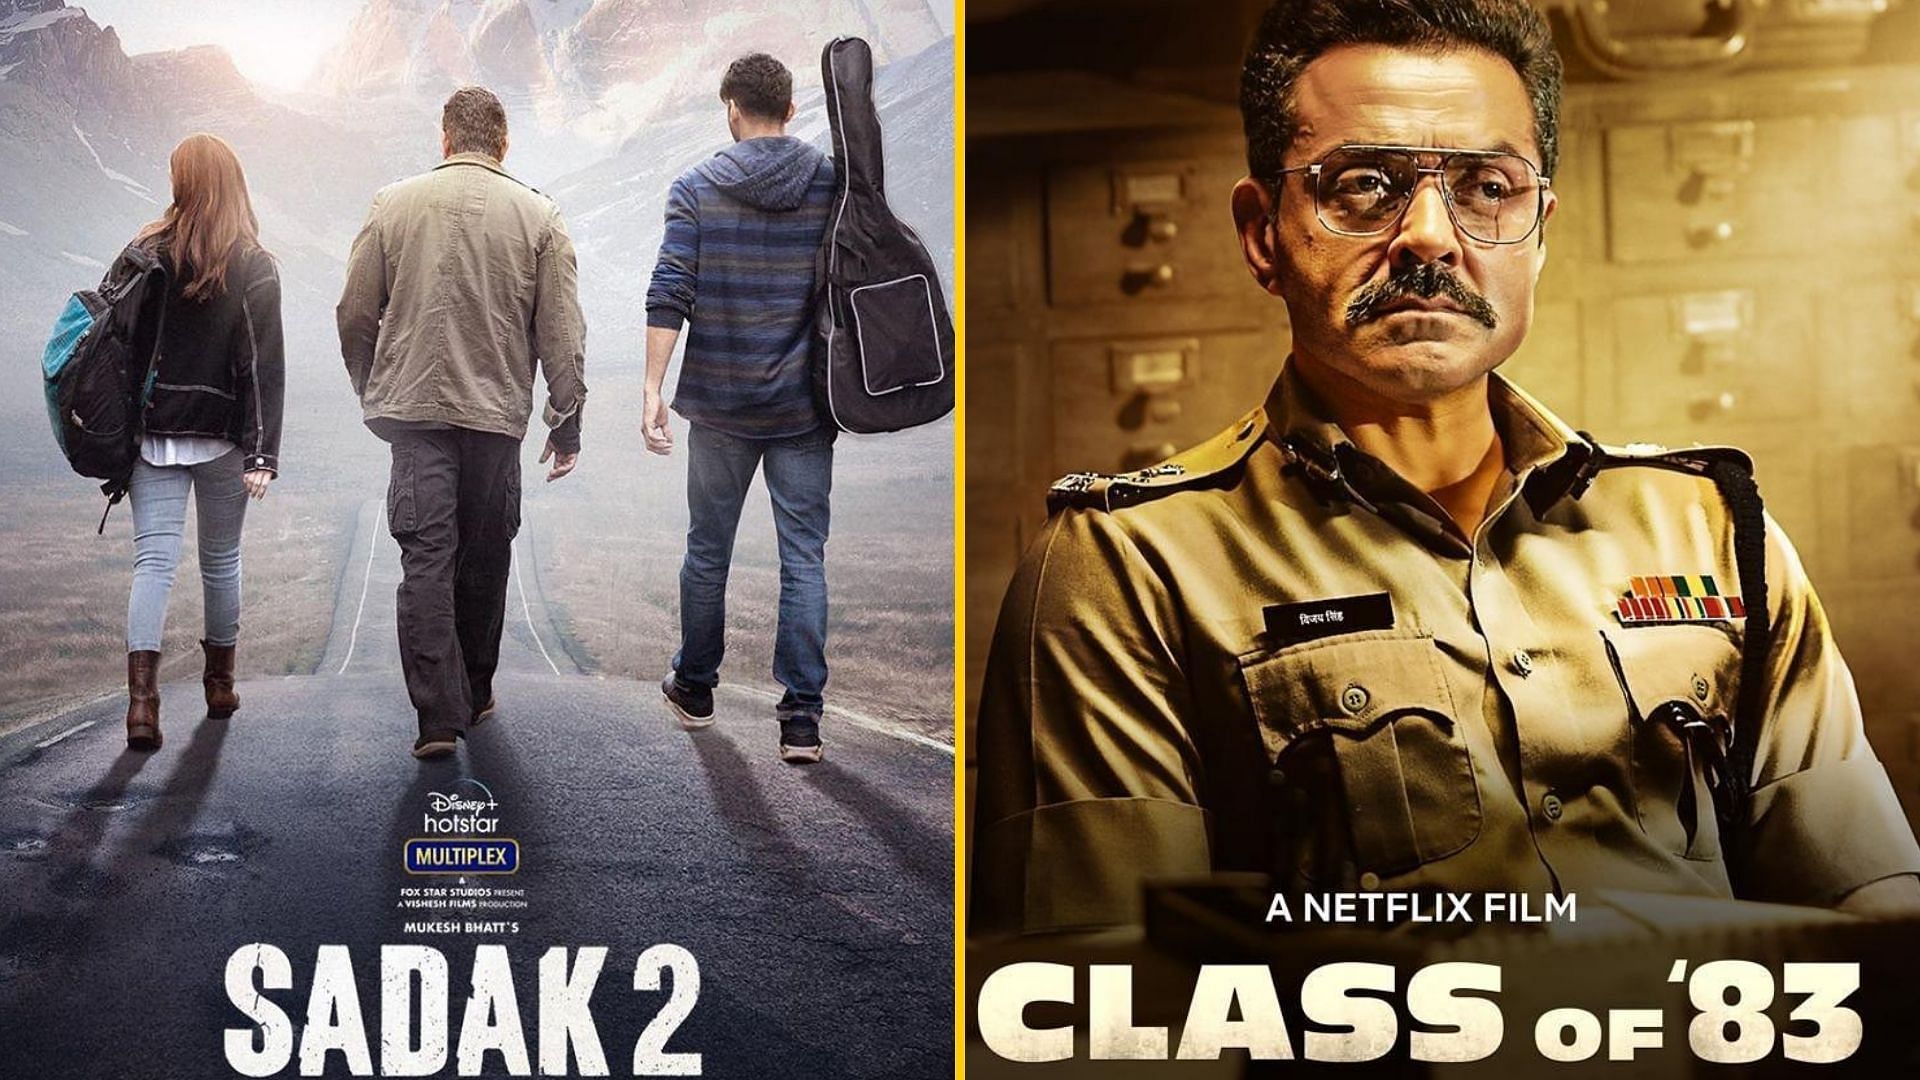 'Sadak 2' and 'Class of 83' are set for their OTT premieres.